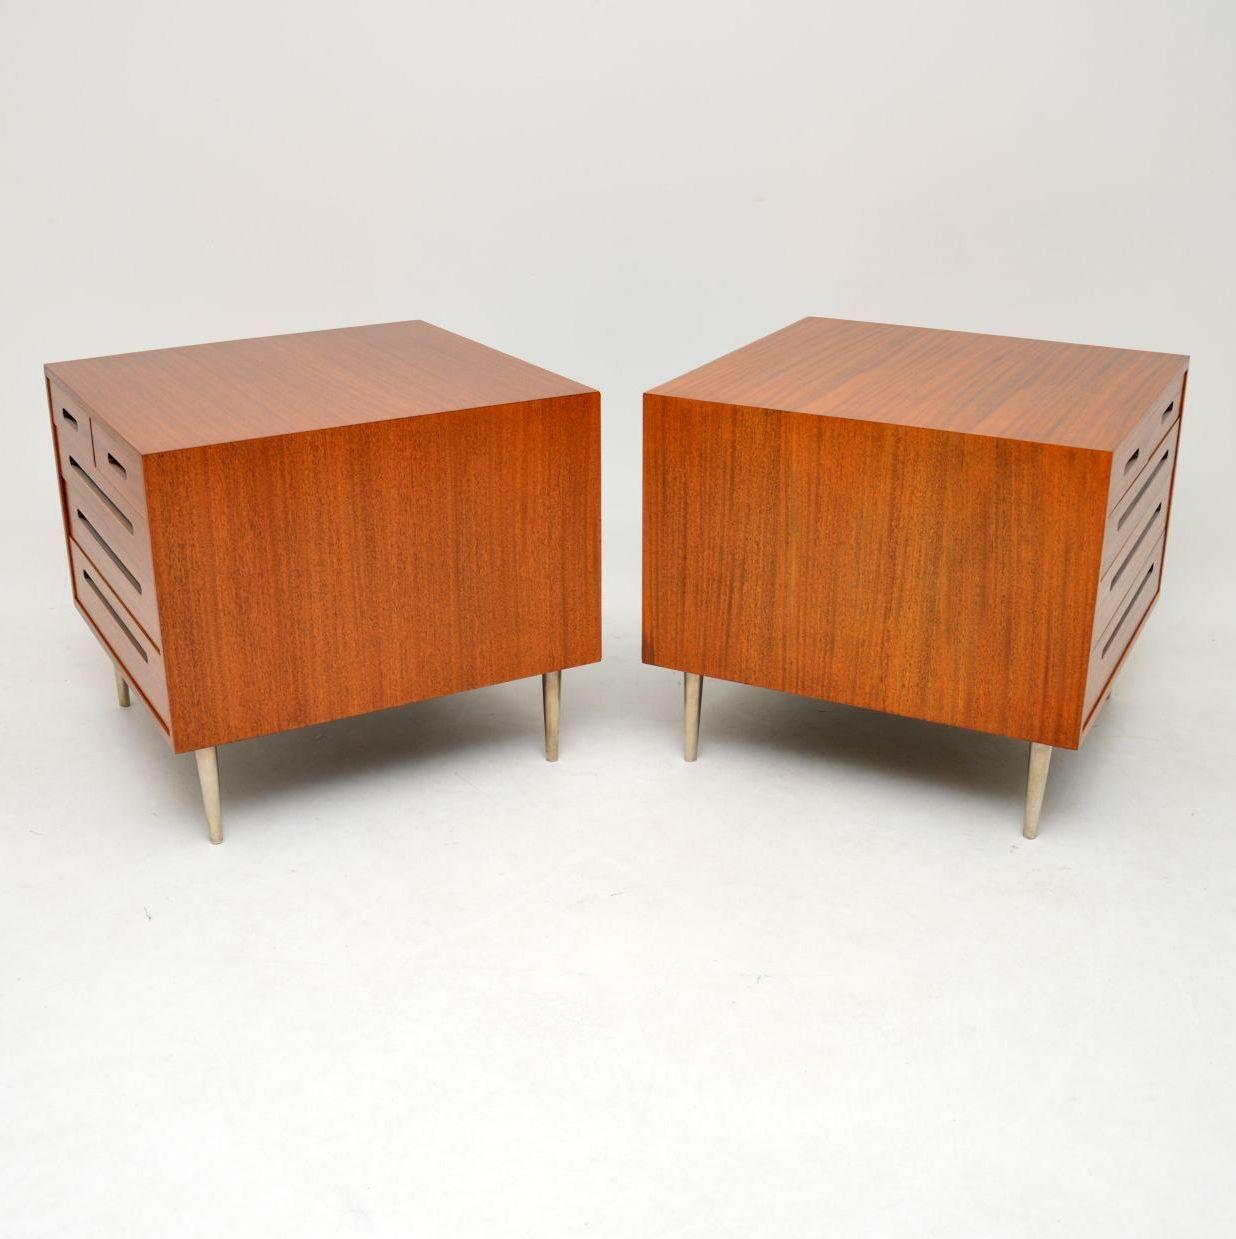 American 1960's Pair of Vintage Chests by Edward Wormley for Dunbar For Sale